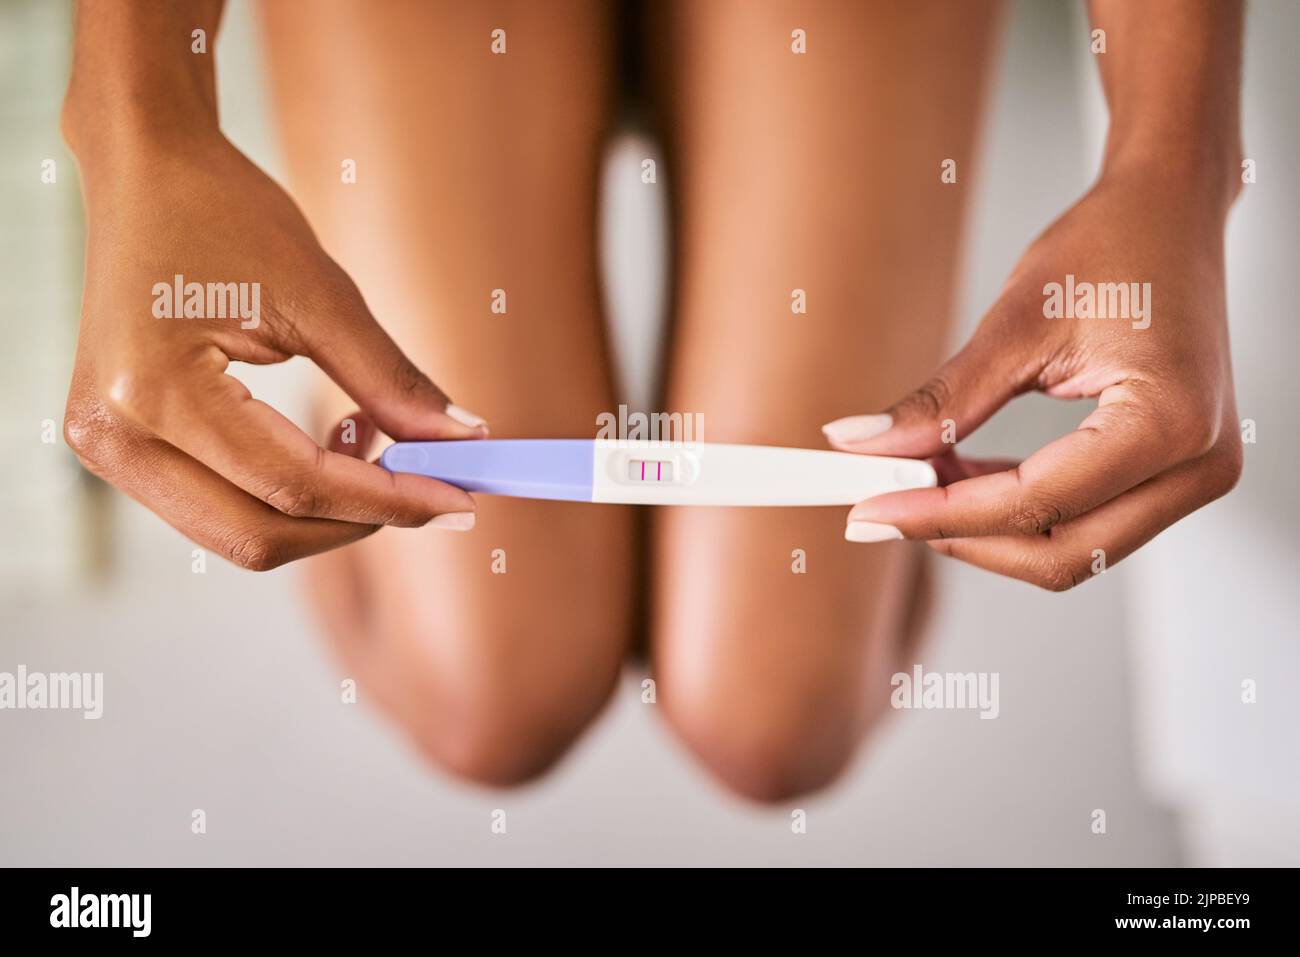 The start of a new chapter. a woman taking a pregnancy test while sitting on the toilet. Stock Photo